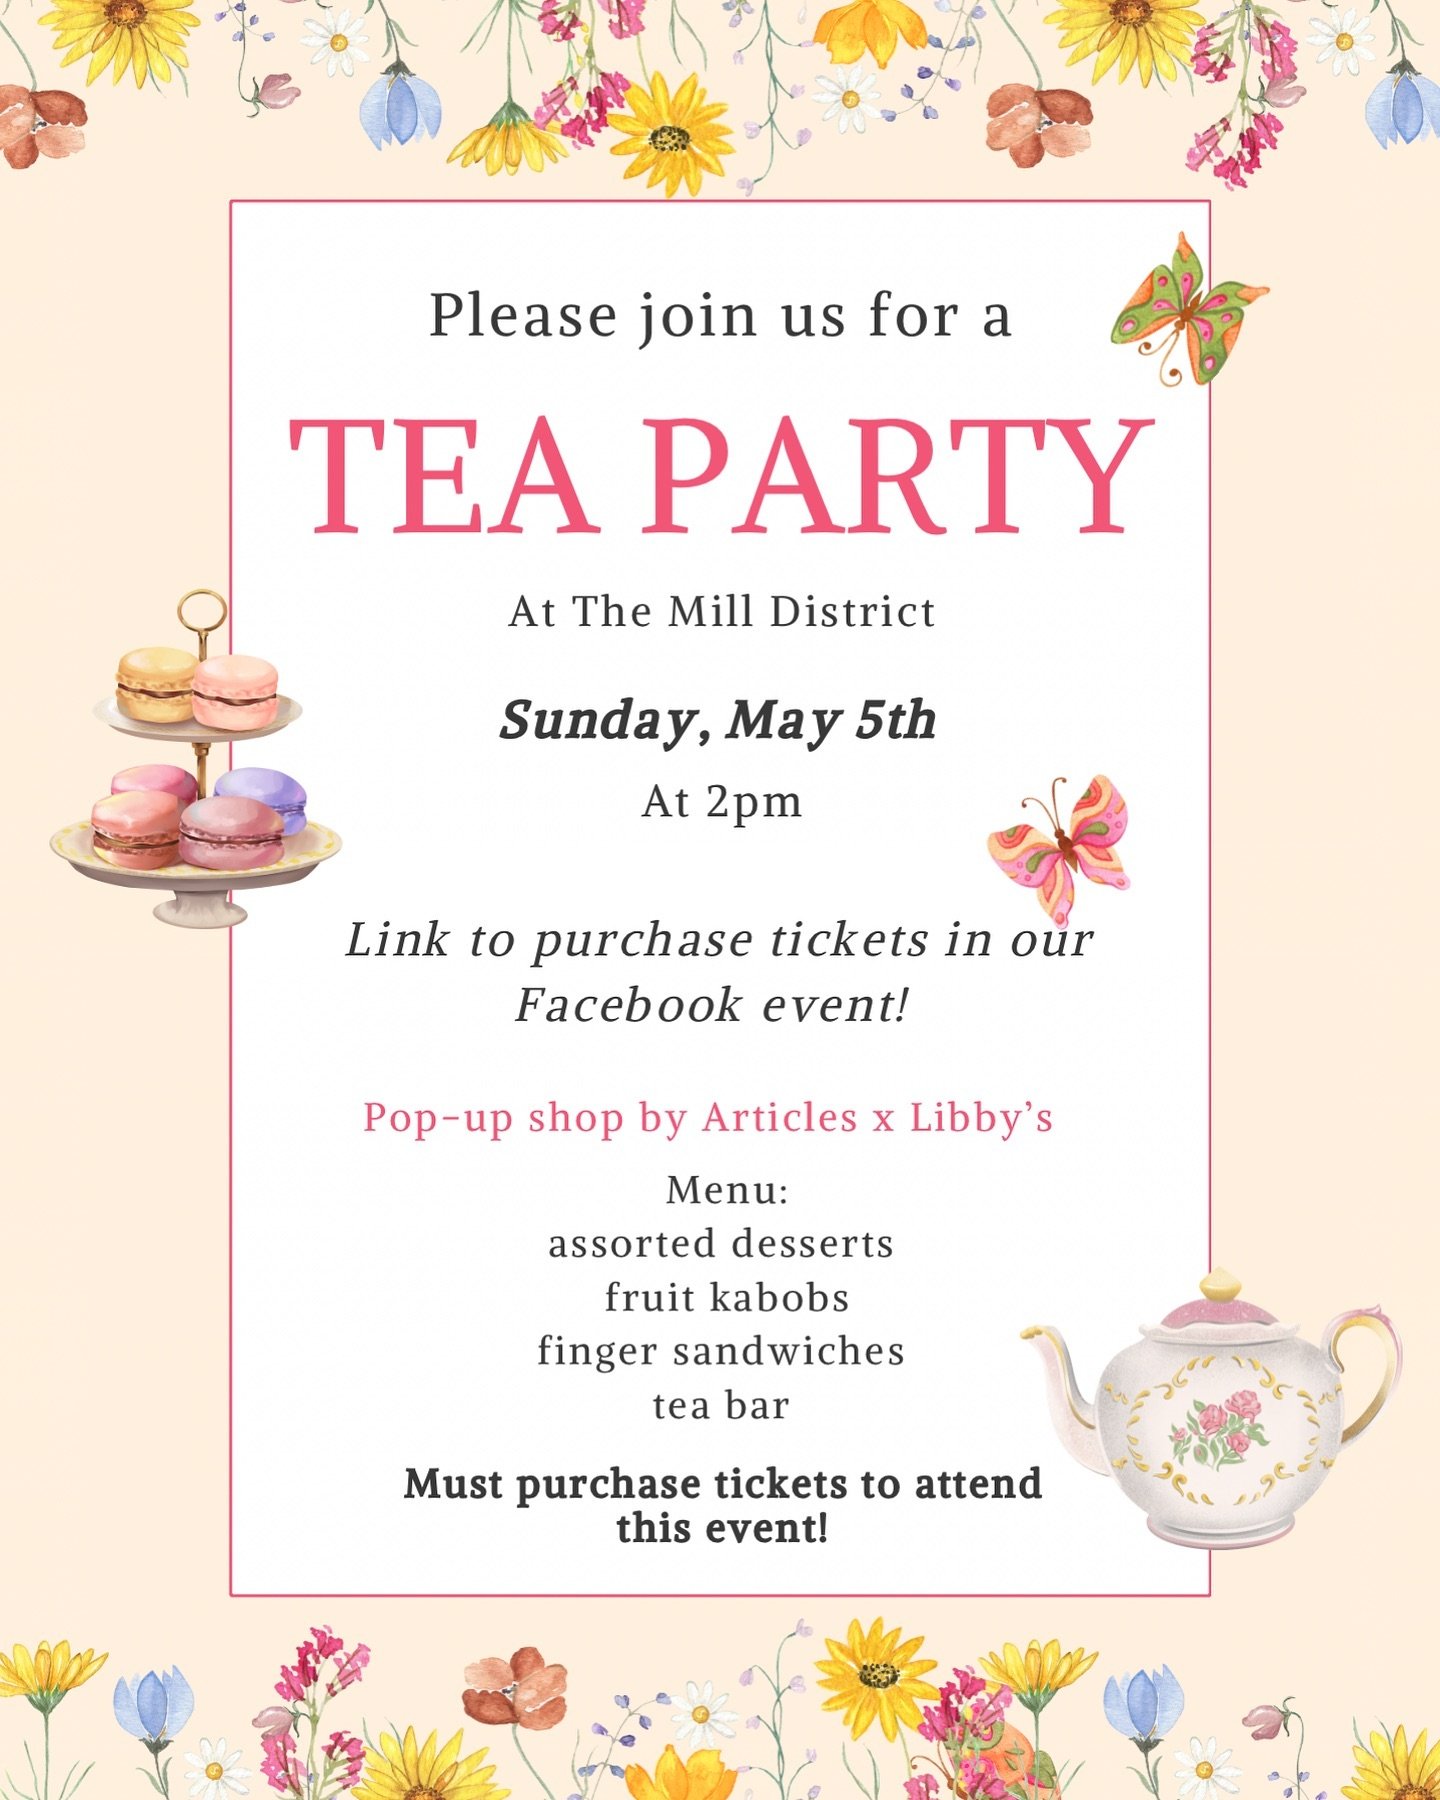 Tea Party at The Mill District! 🫖 

Bring your friends, daughters, sister, or gift a ticket to your mom for Mother&rsquo;s Day 🩷 

Delicate sandwiches, assorted desserts, a tea bar, shopping, and photo ops make the perfect day out for the ladies in